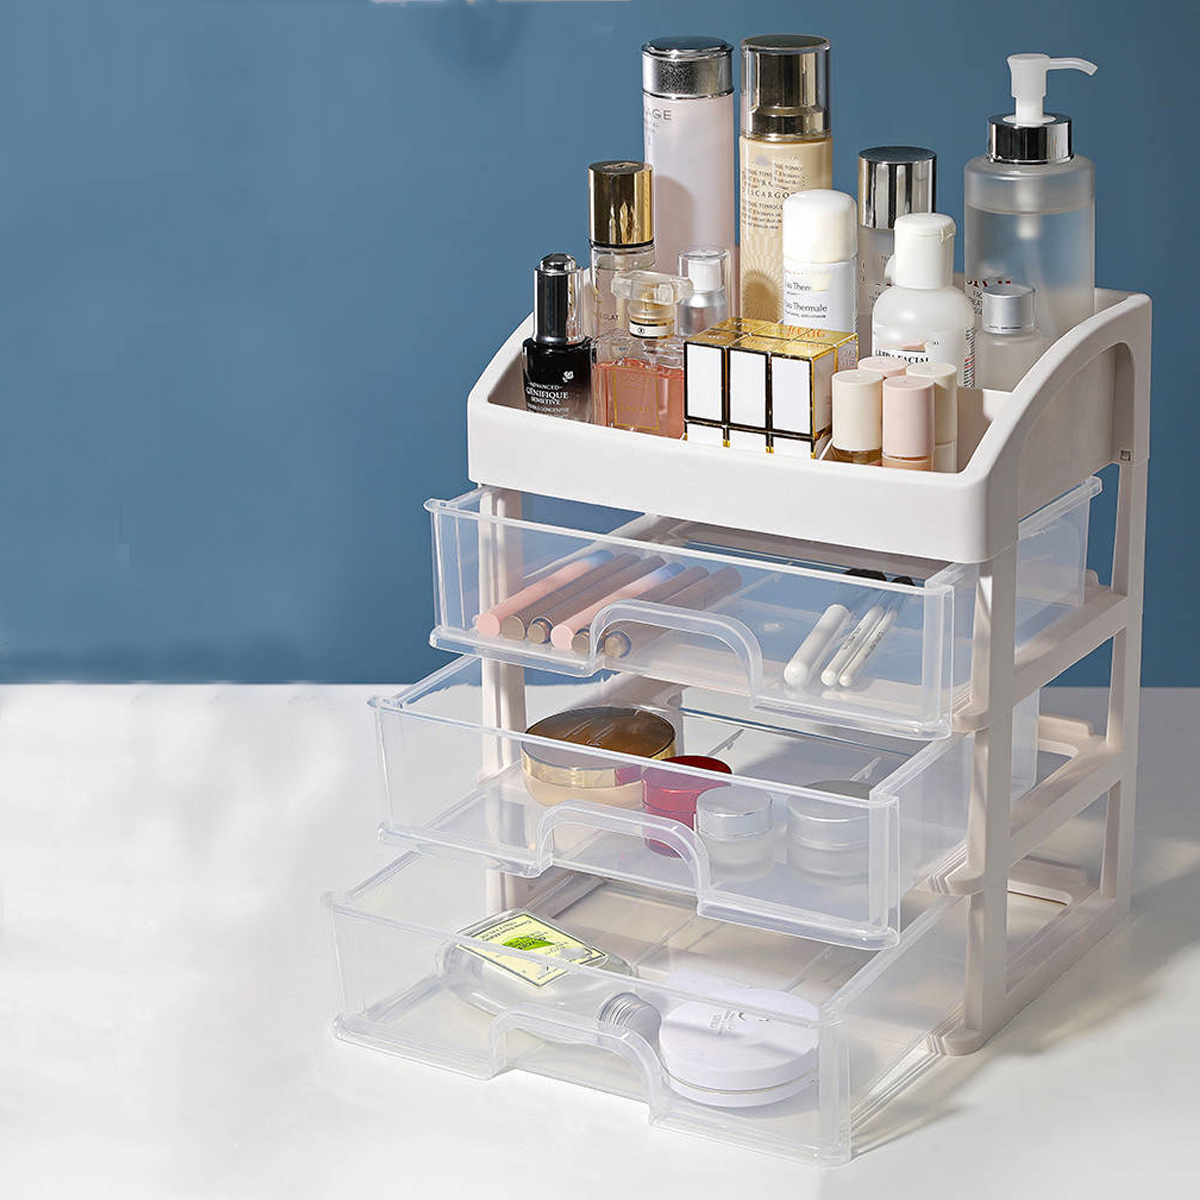 123-Layers-Cosmetic-Storage-Box-Jewelry-Holder-Makeup-Drawer-Case-Desktop-Organizer-Container-1791015-8